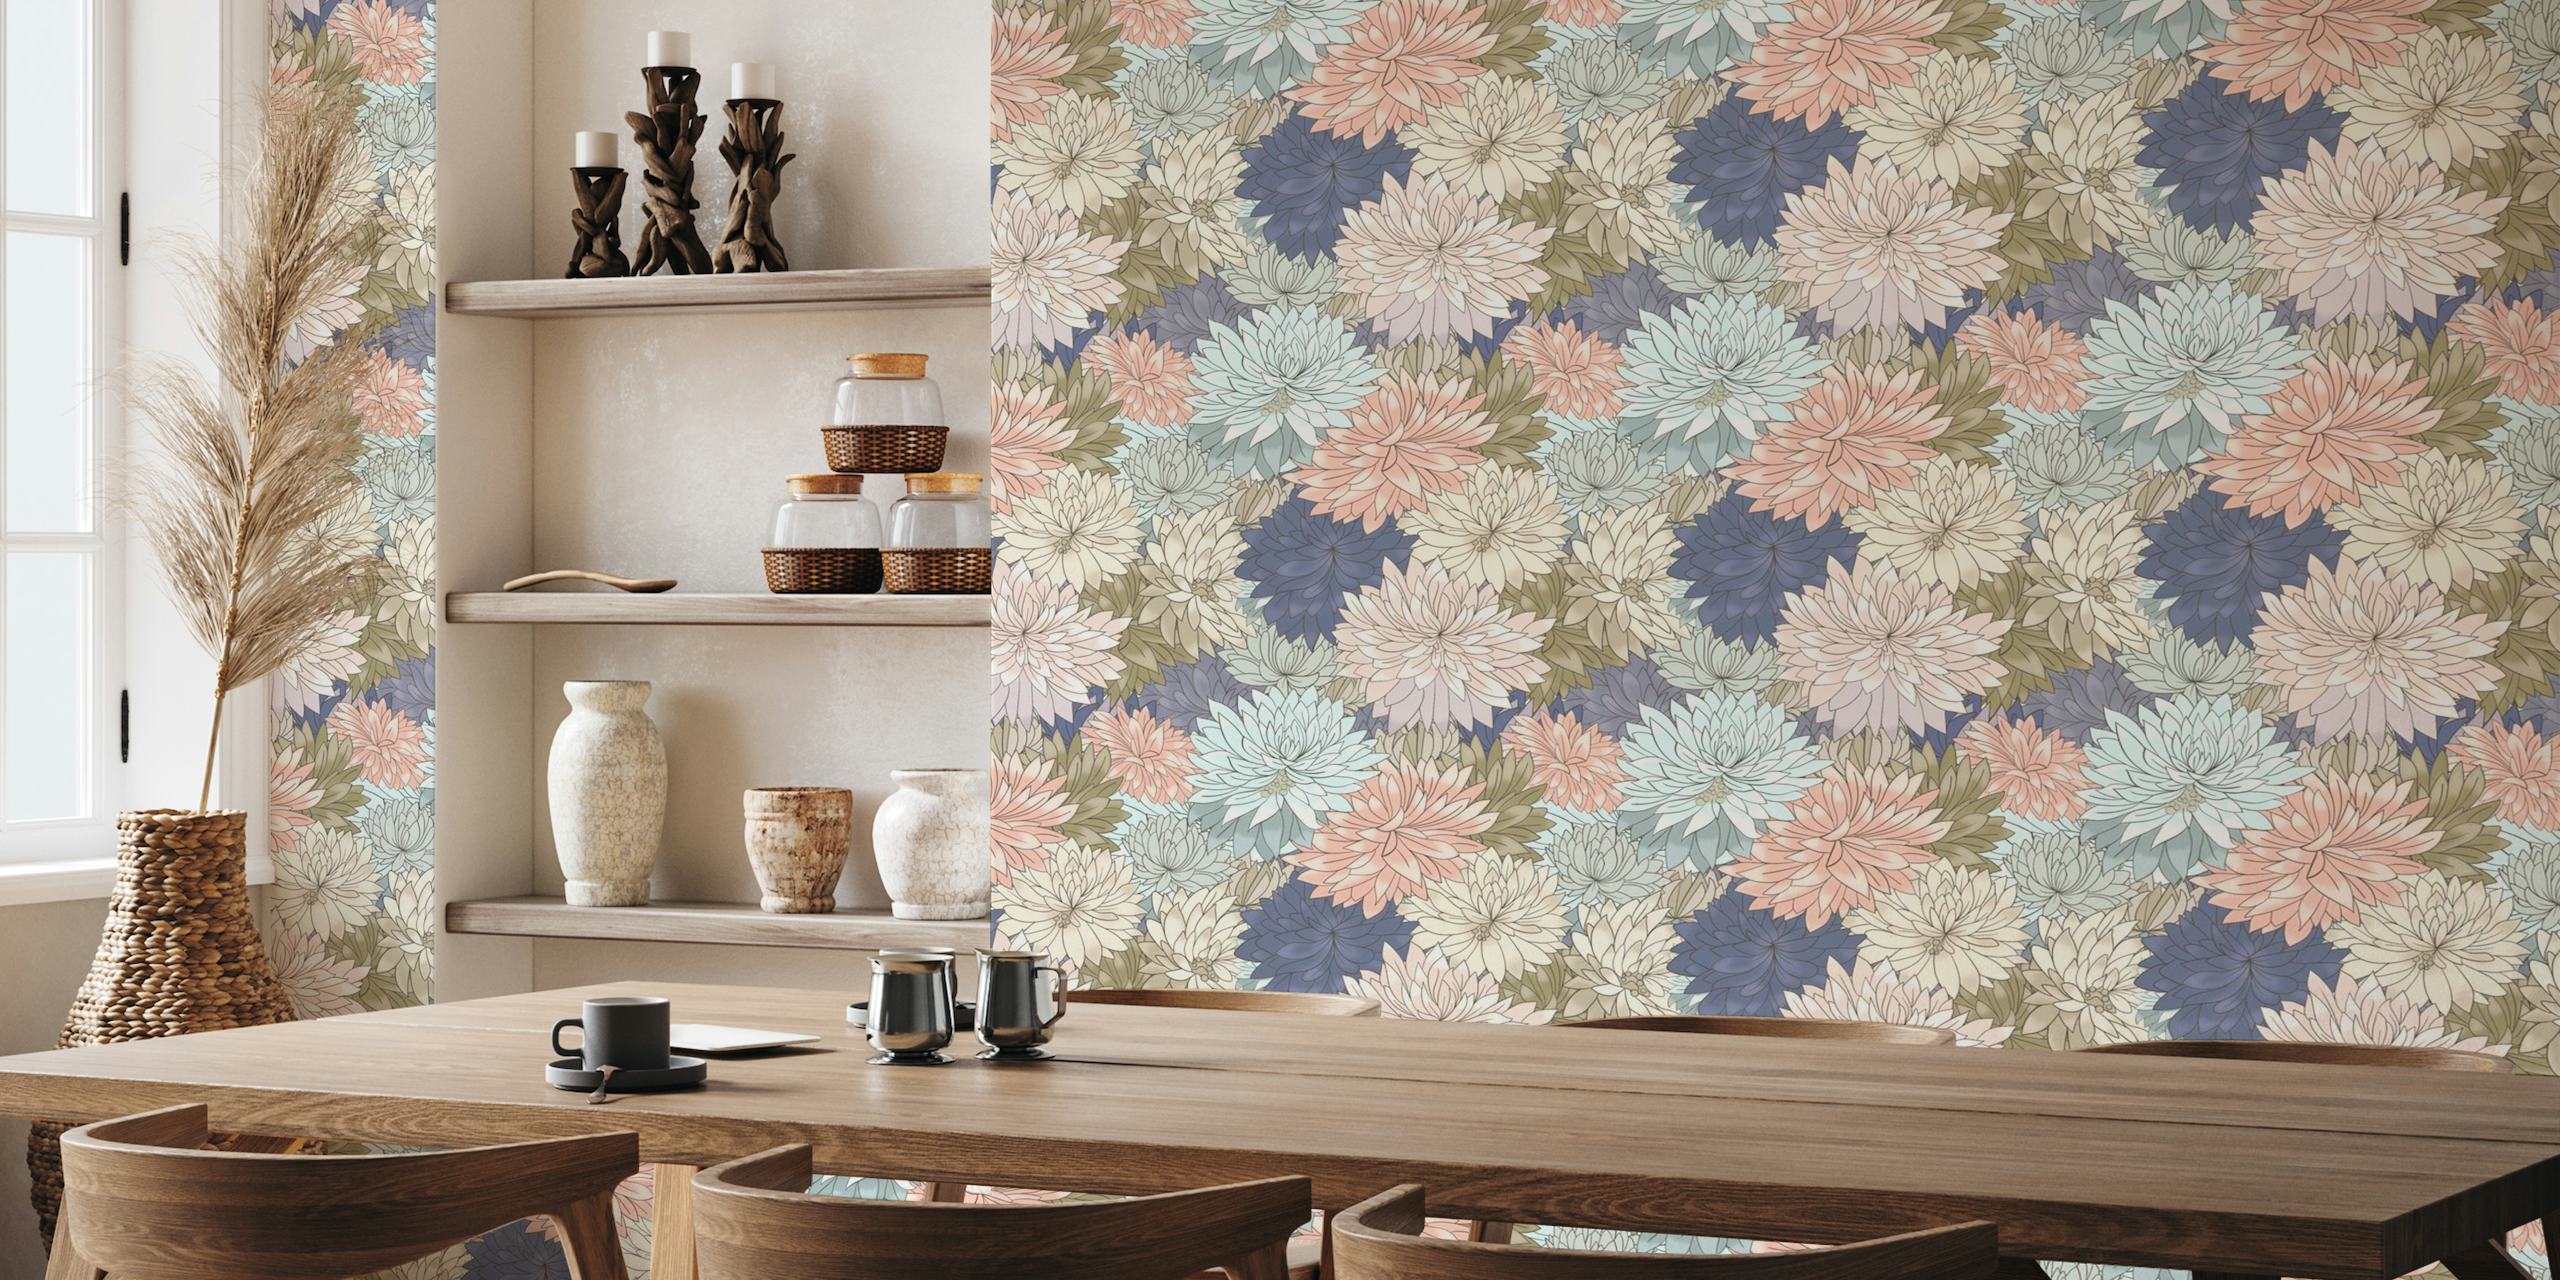 Pastel-colored dahlia flowers wall mural for a serene home decor theme